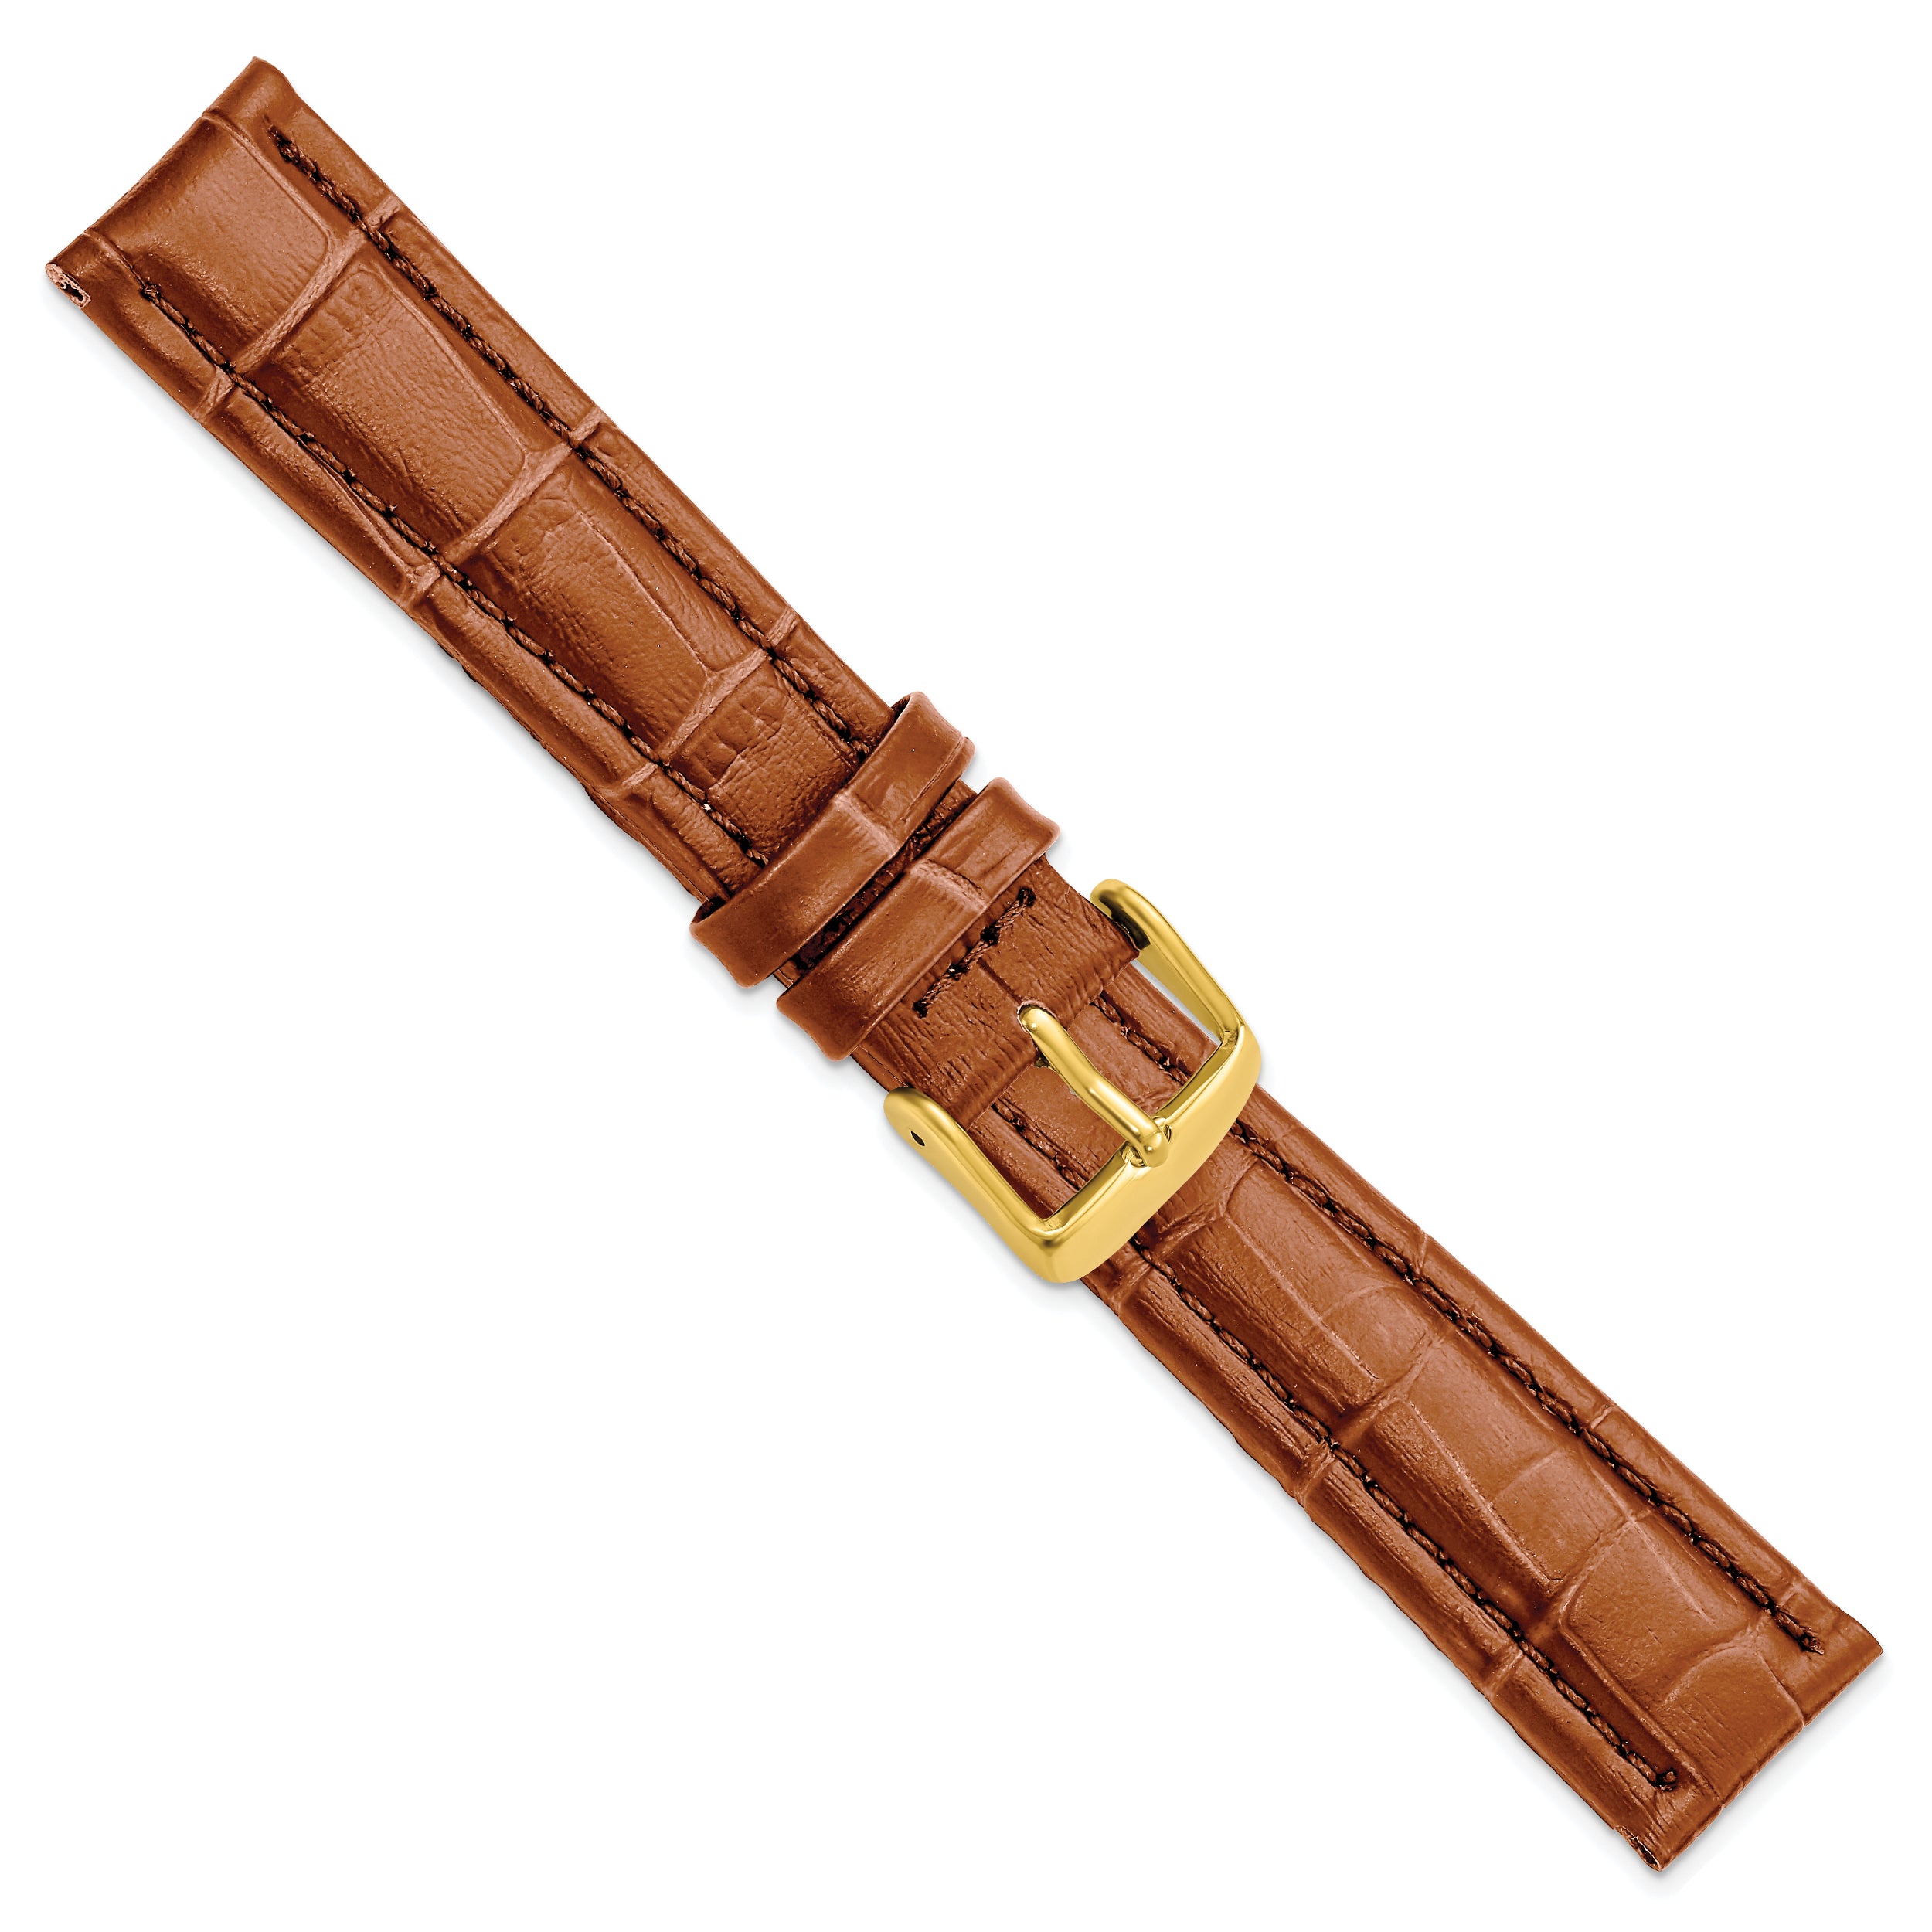 14mm Havana Matte Alligator Grain Leather with Gold-tone Buckle 6.75 inch Watch Band